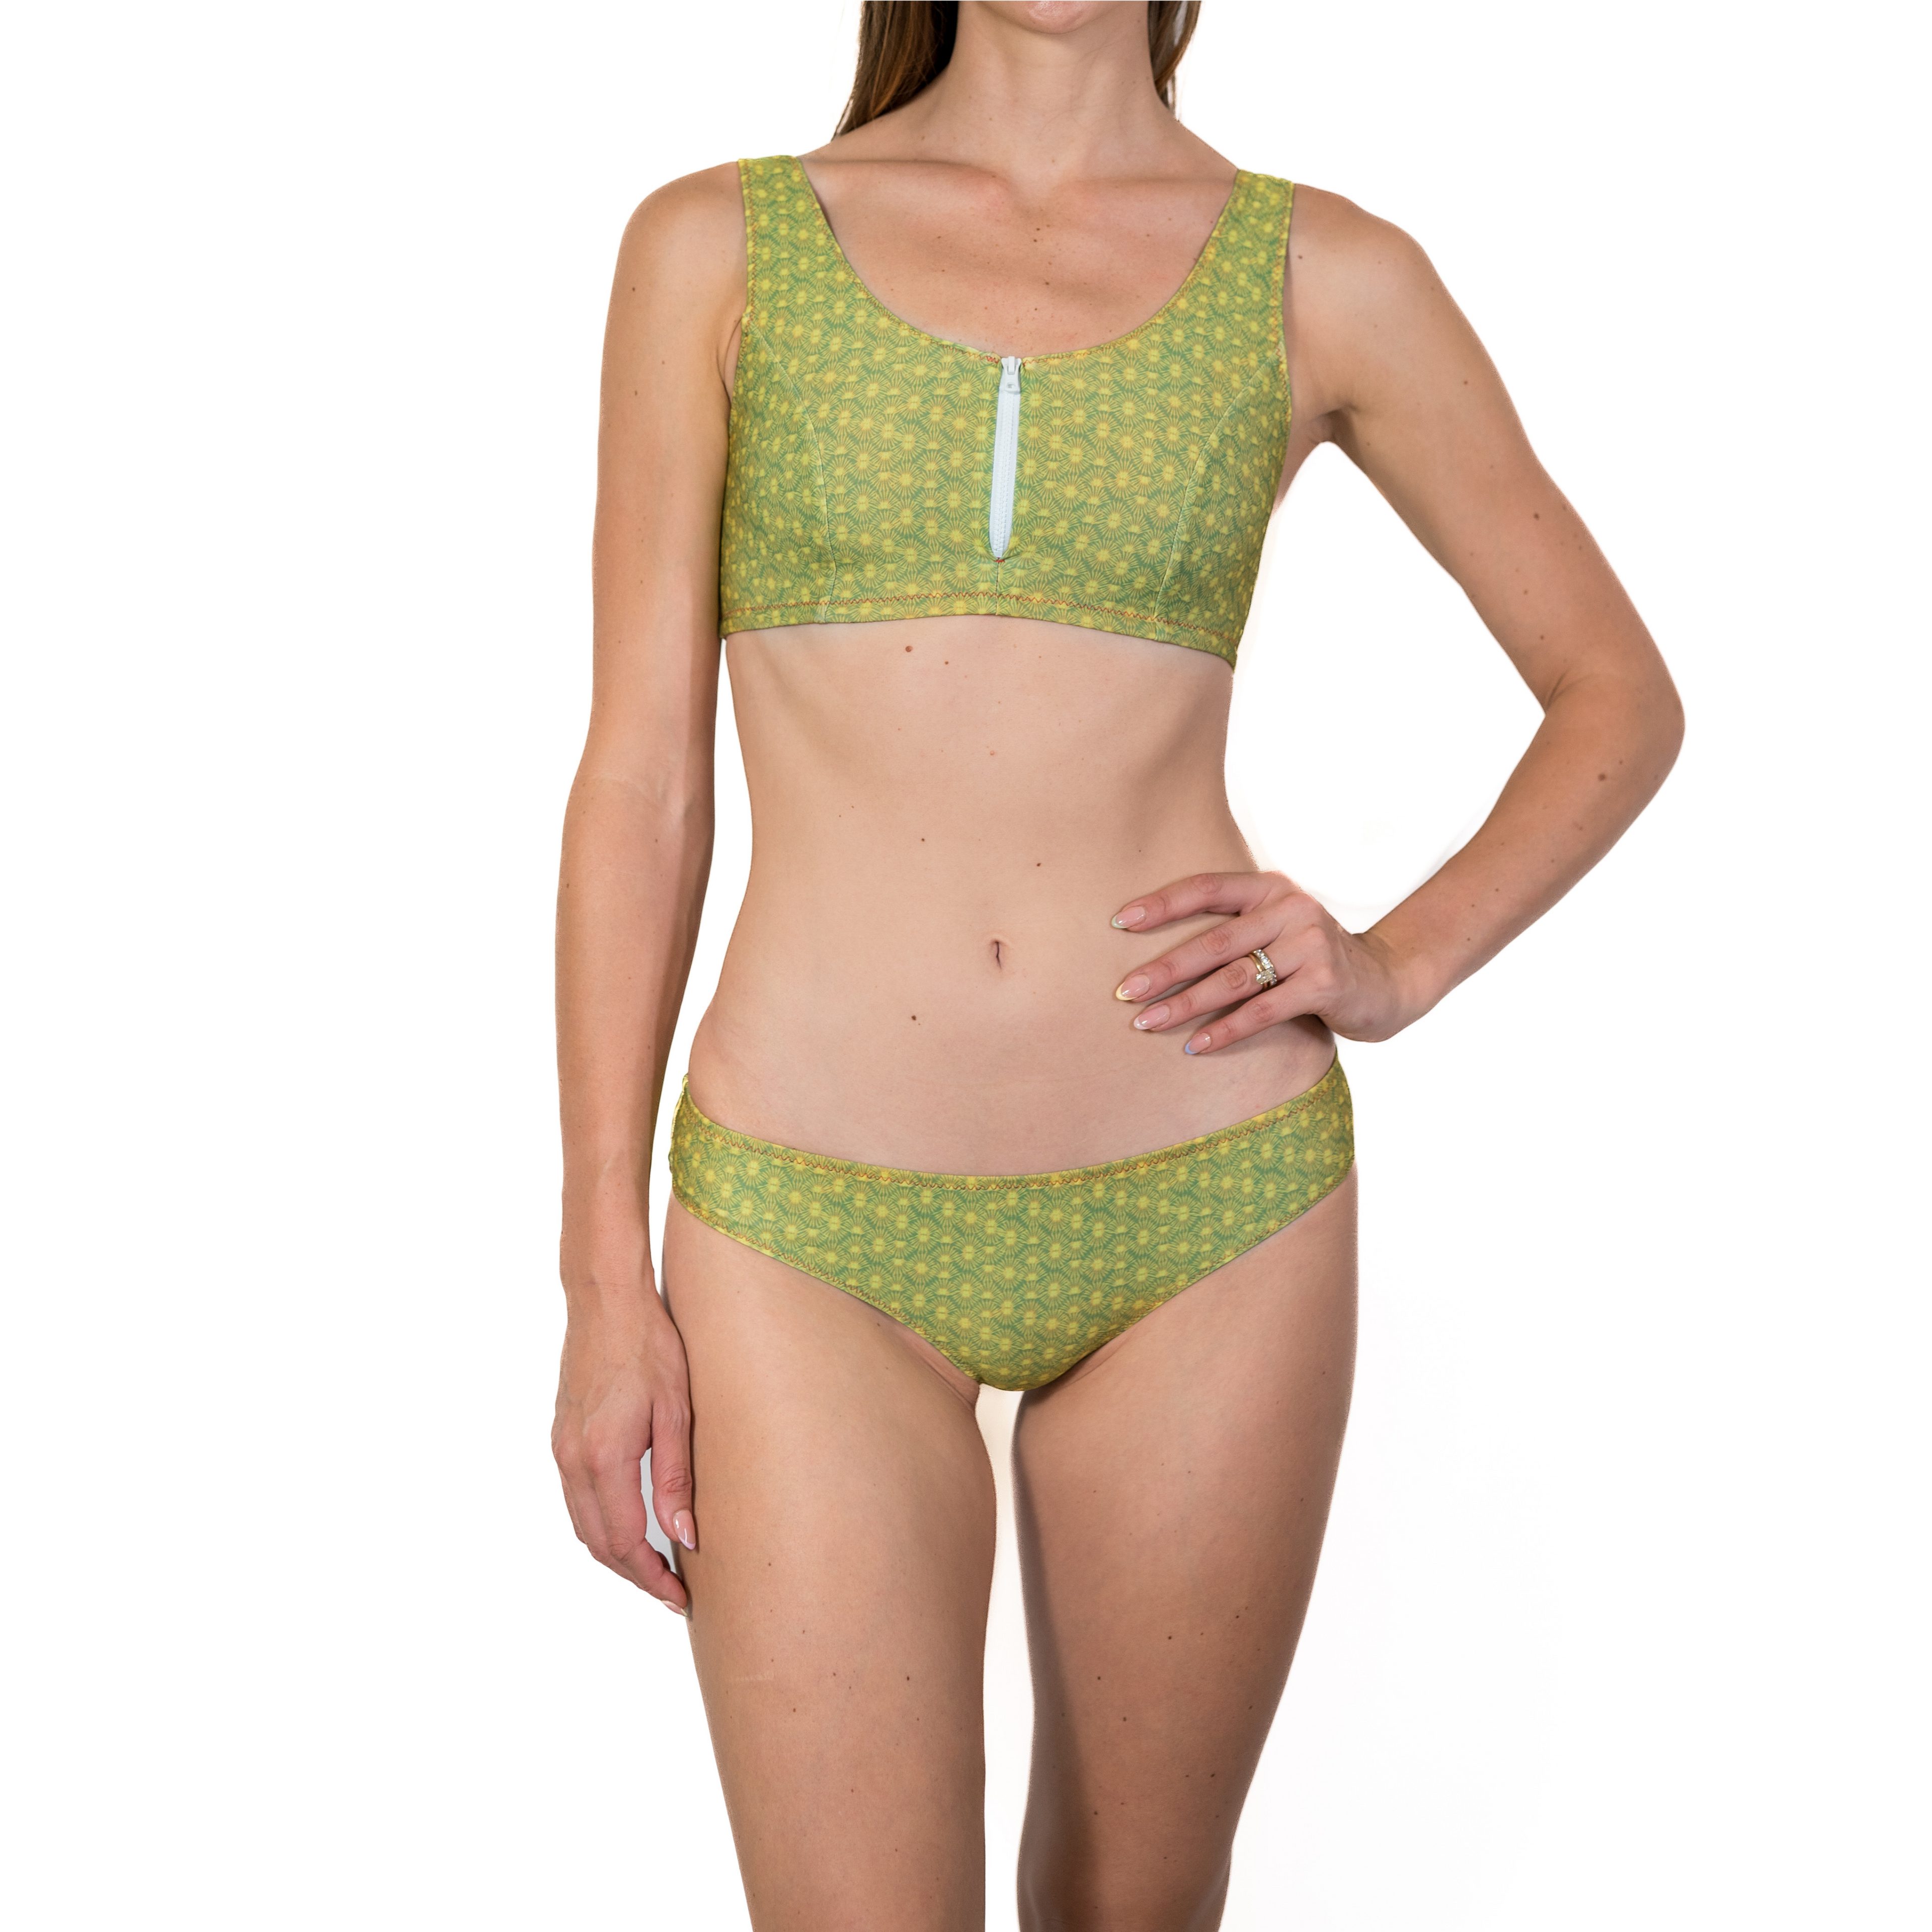 Aima Dora- Classic Bottom - Front / Turtle bay - Baie aux tortues